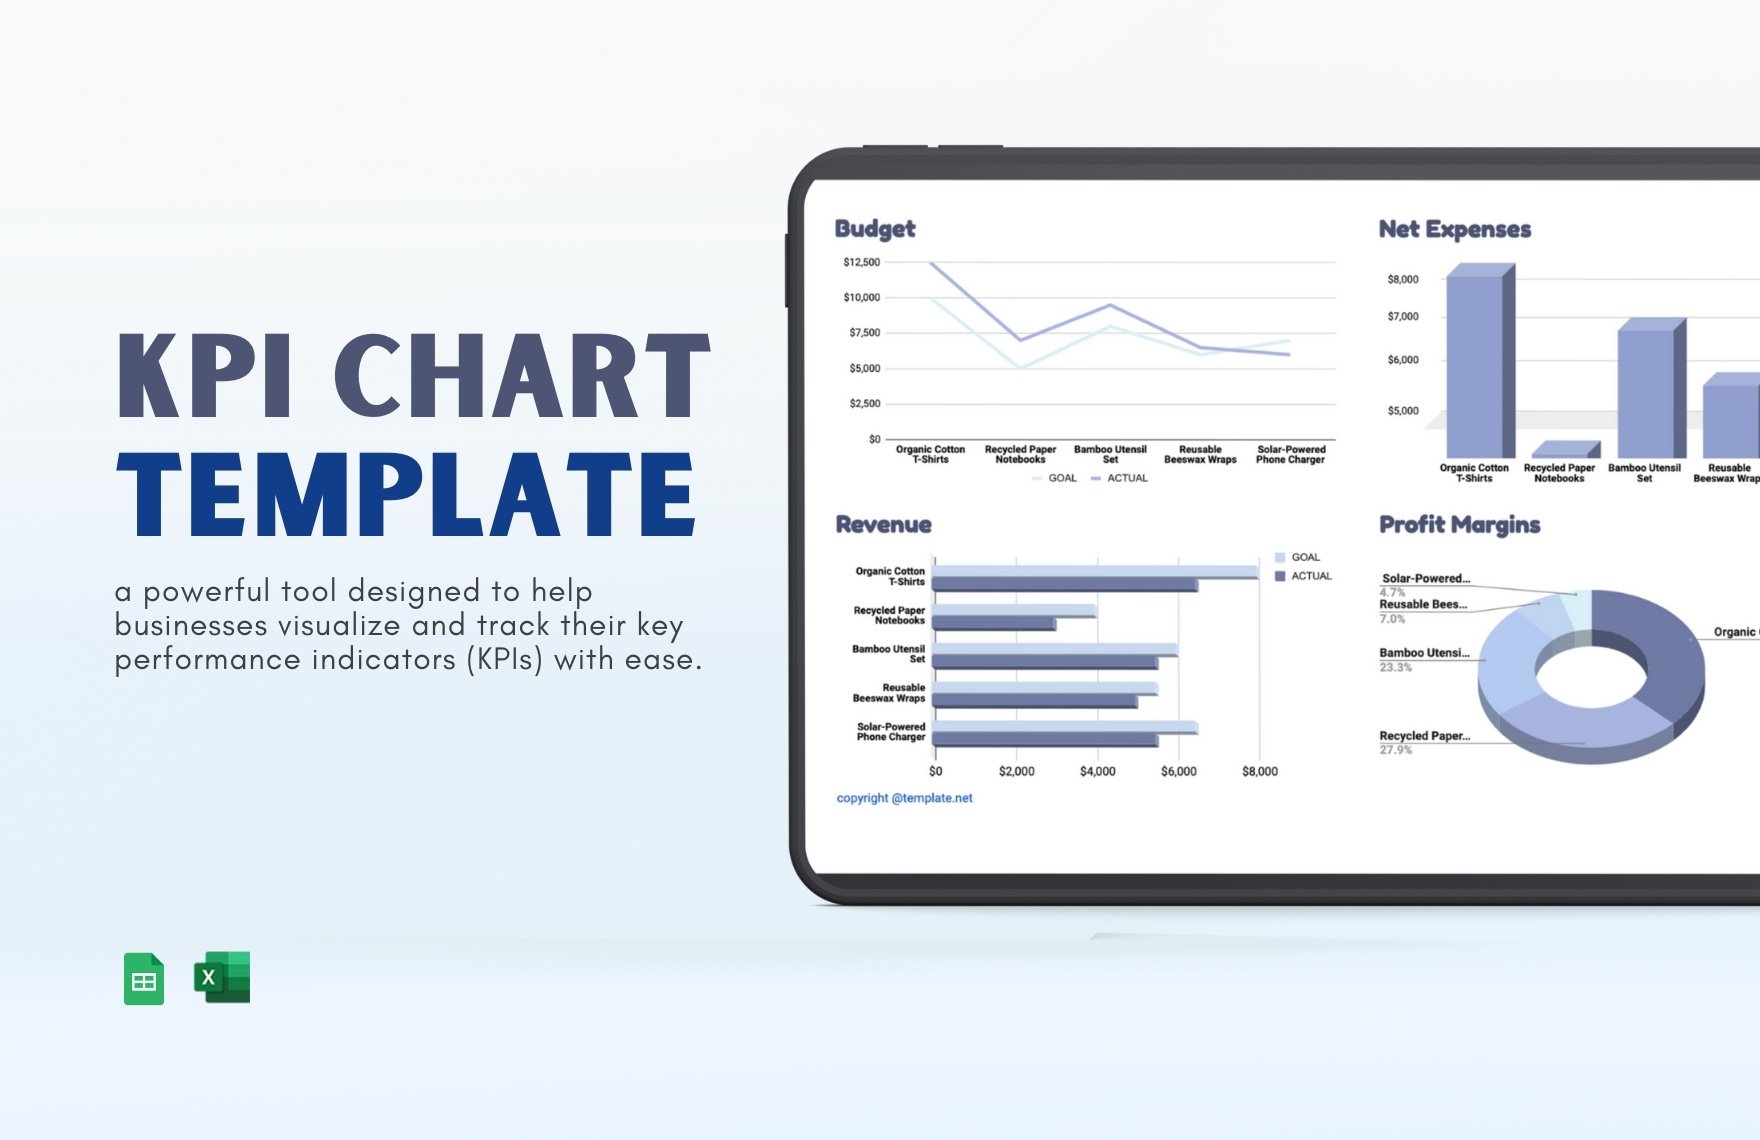 KPI Chart Template in Excel, Google Sheets